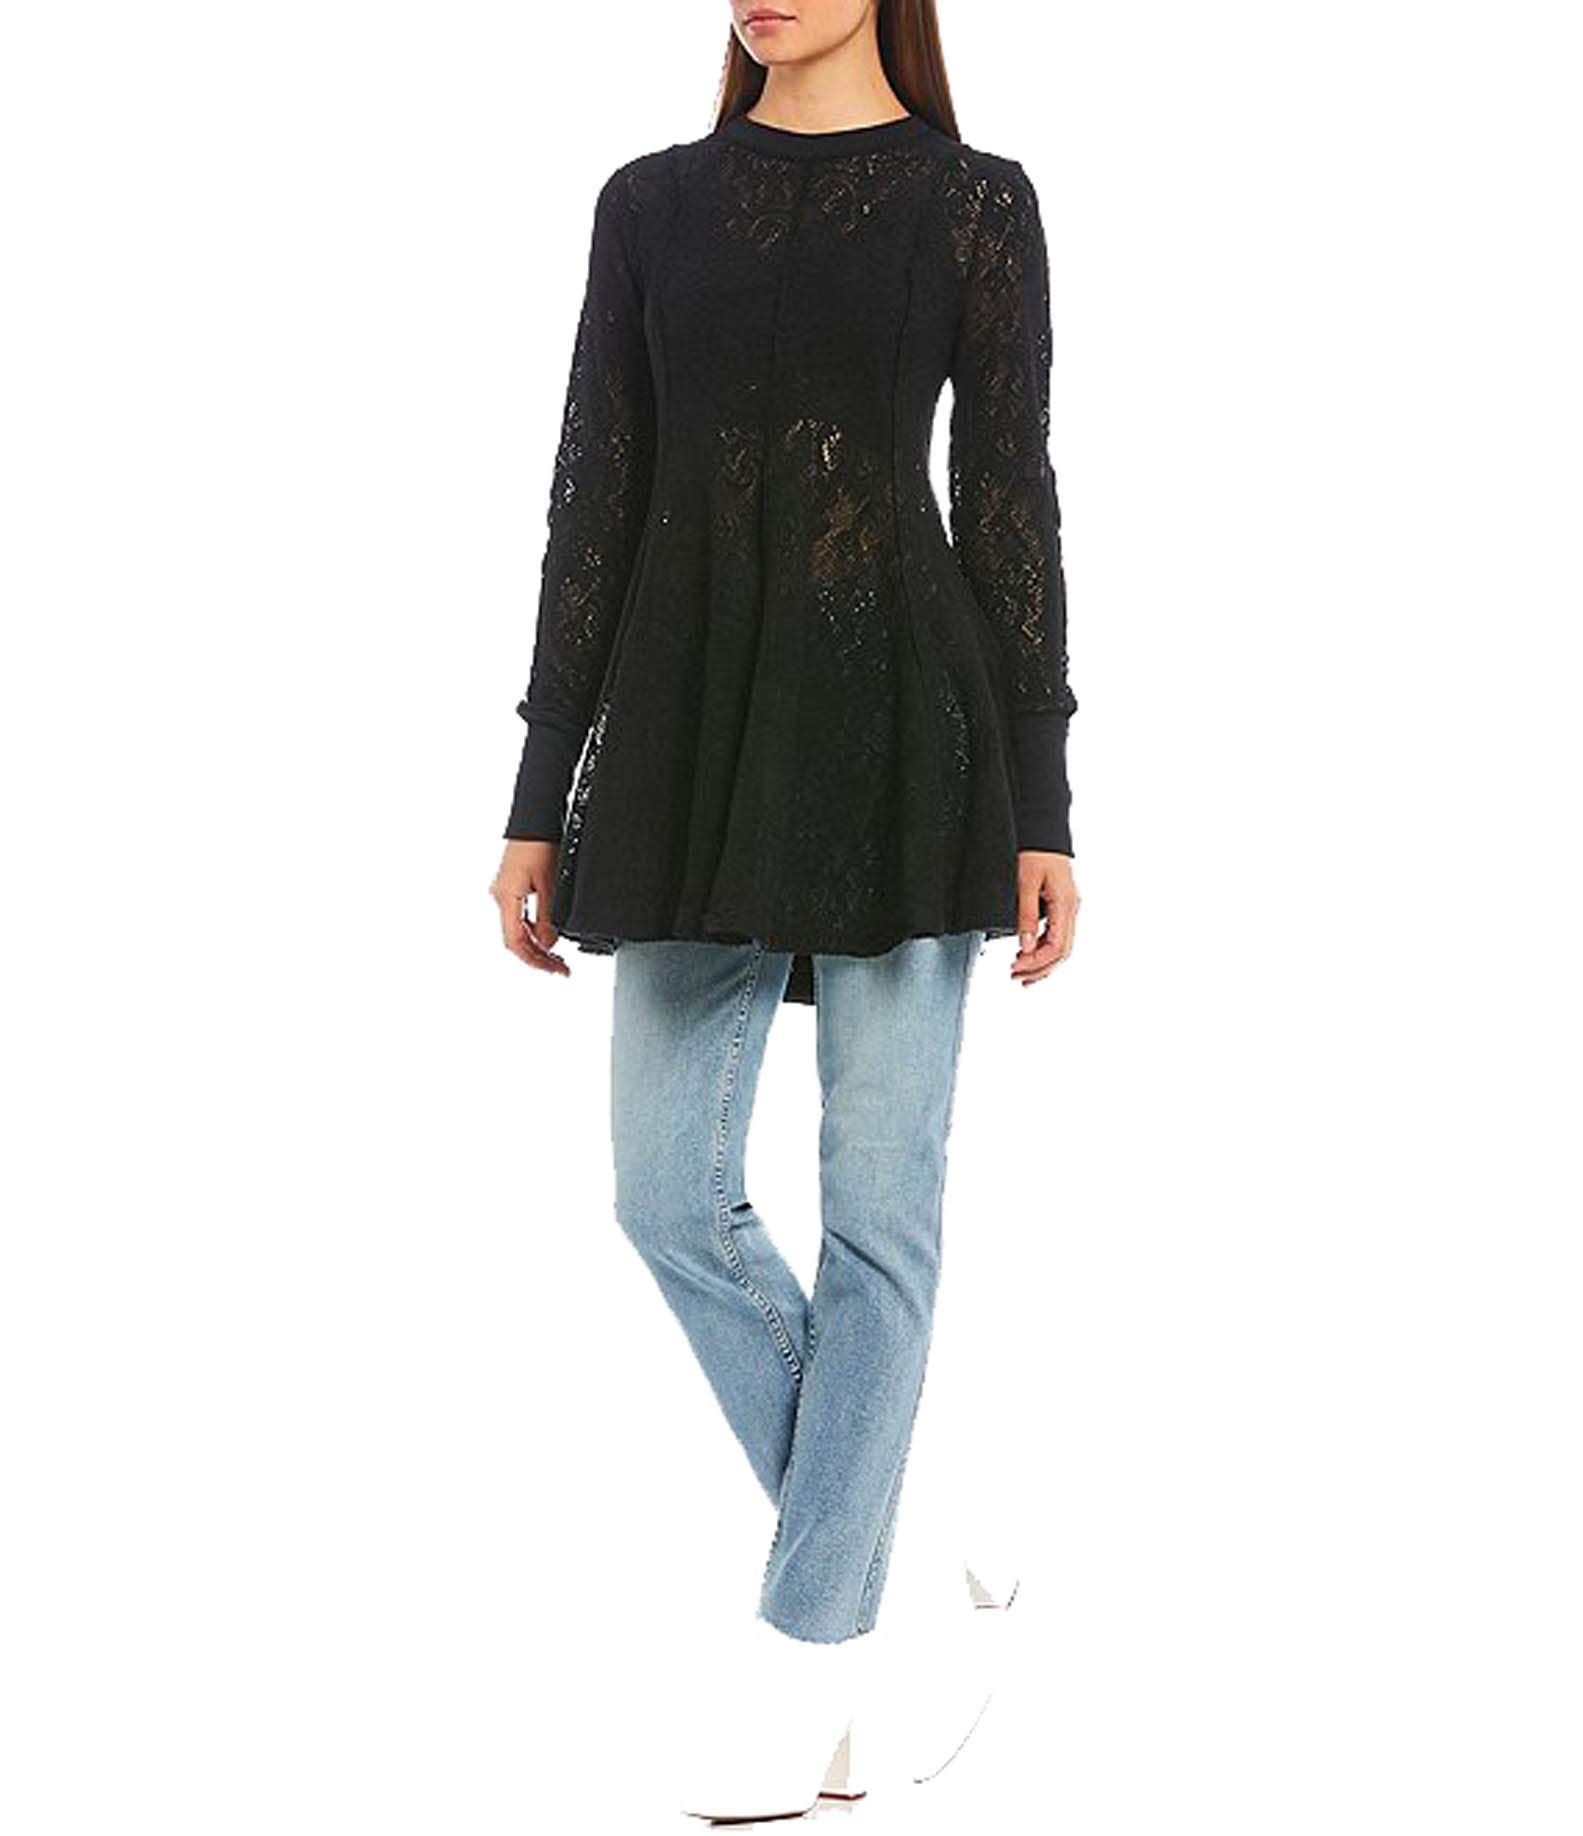 Color: Blacks Size Type: Regular Size (Women's): S Sleeve Length: Long Sleeve Type: Blouse Style: Tunic Neckline: Round Neck Pattern: Solid Theme: Classic Material: Polyester